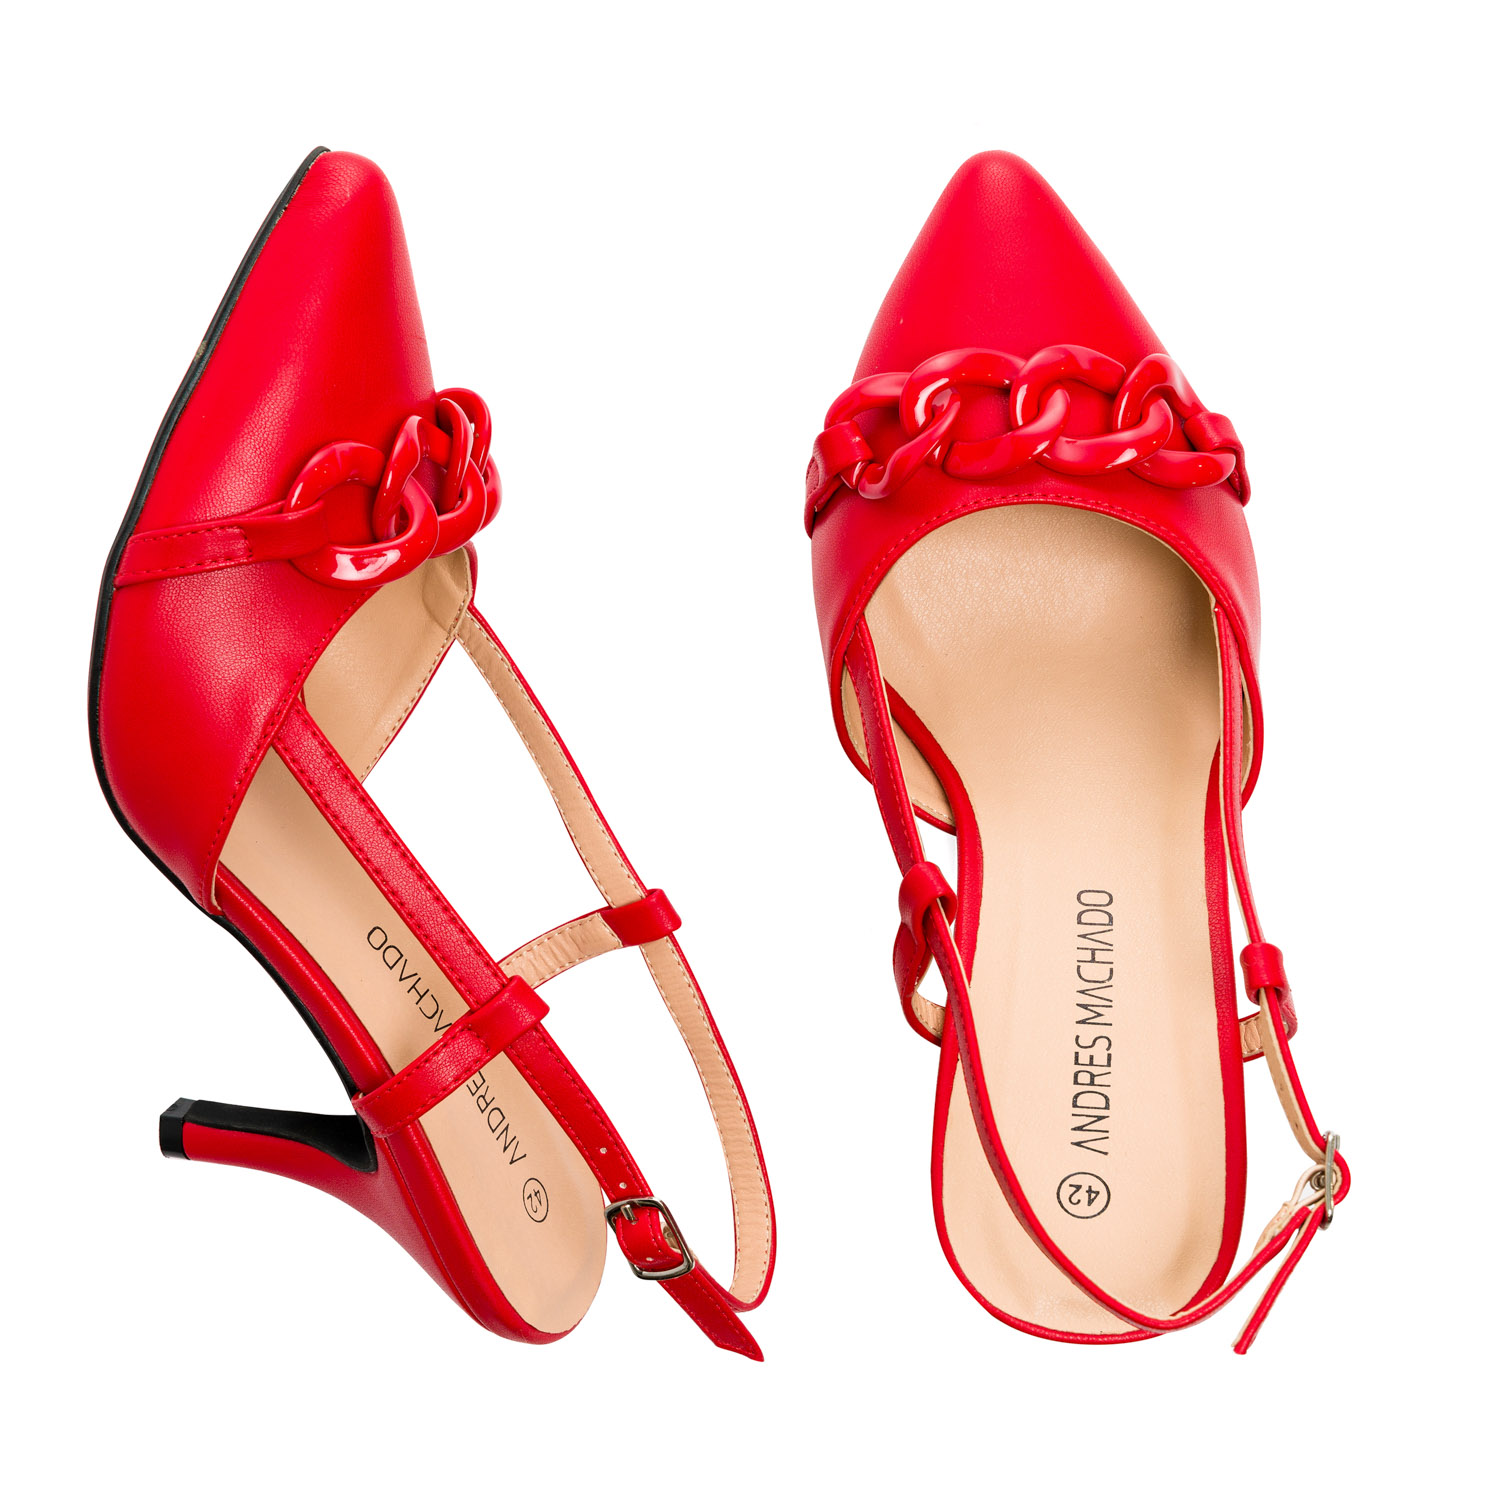 Red faux leather slingback court shoes 